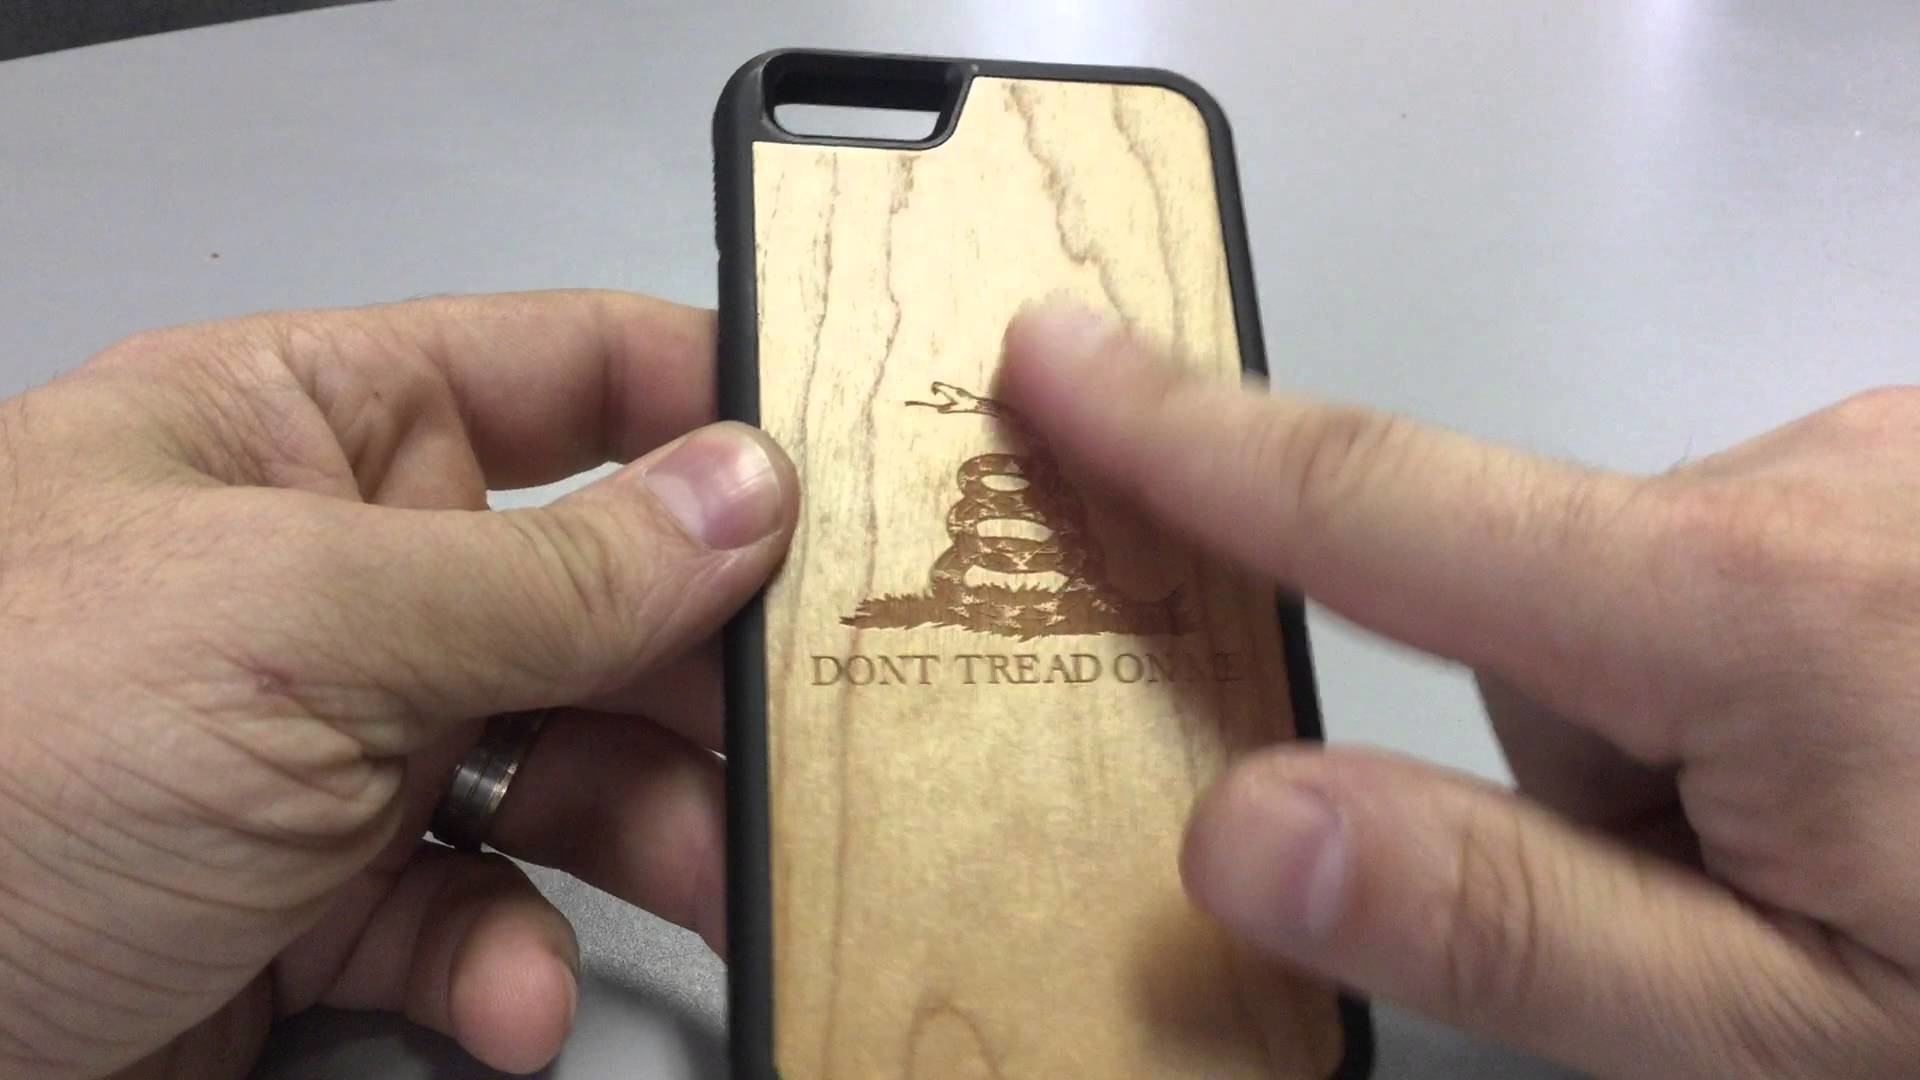 1920x1080 Carved Custom iPhone 6 Case Review w/ Gadsden Flag - Don't tread on me -  YouTube